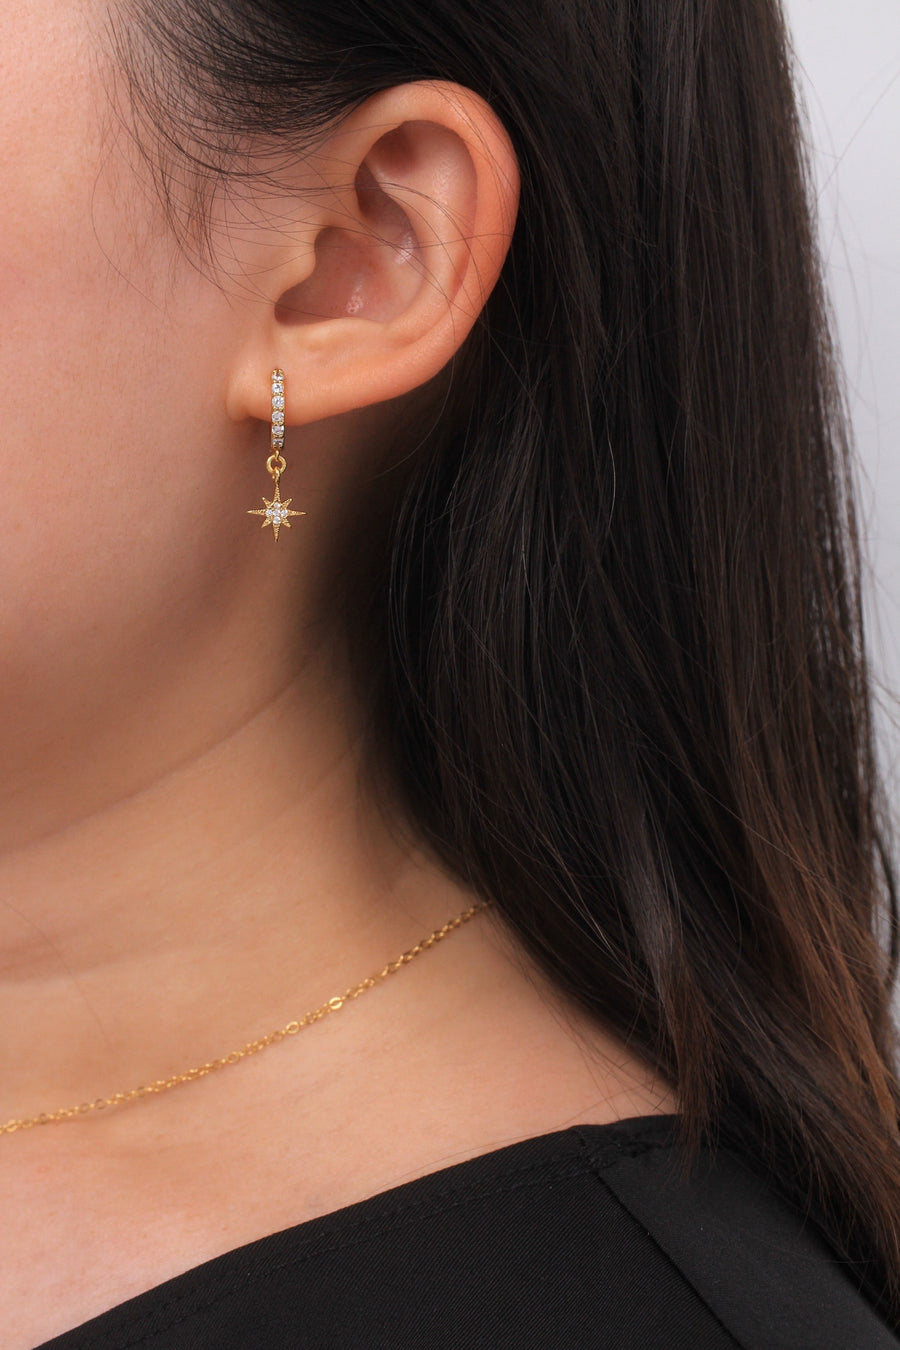 Diamond Hoop Earrings - Stars Can't Shine Without Darkness